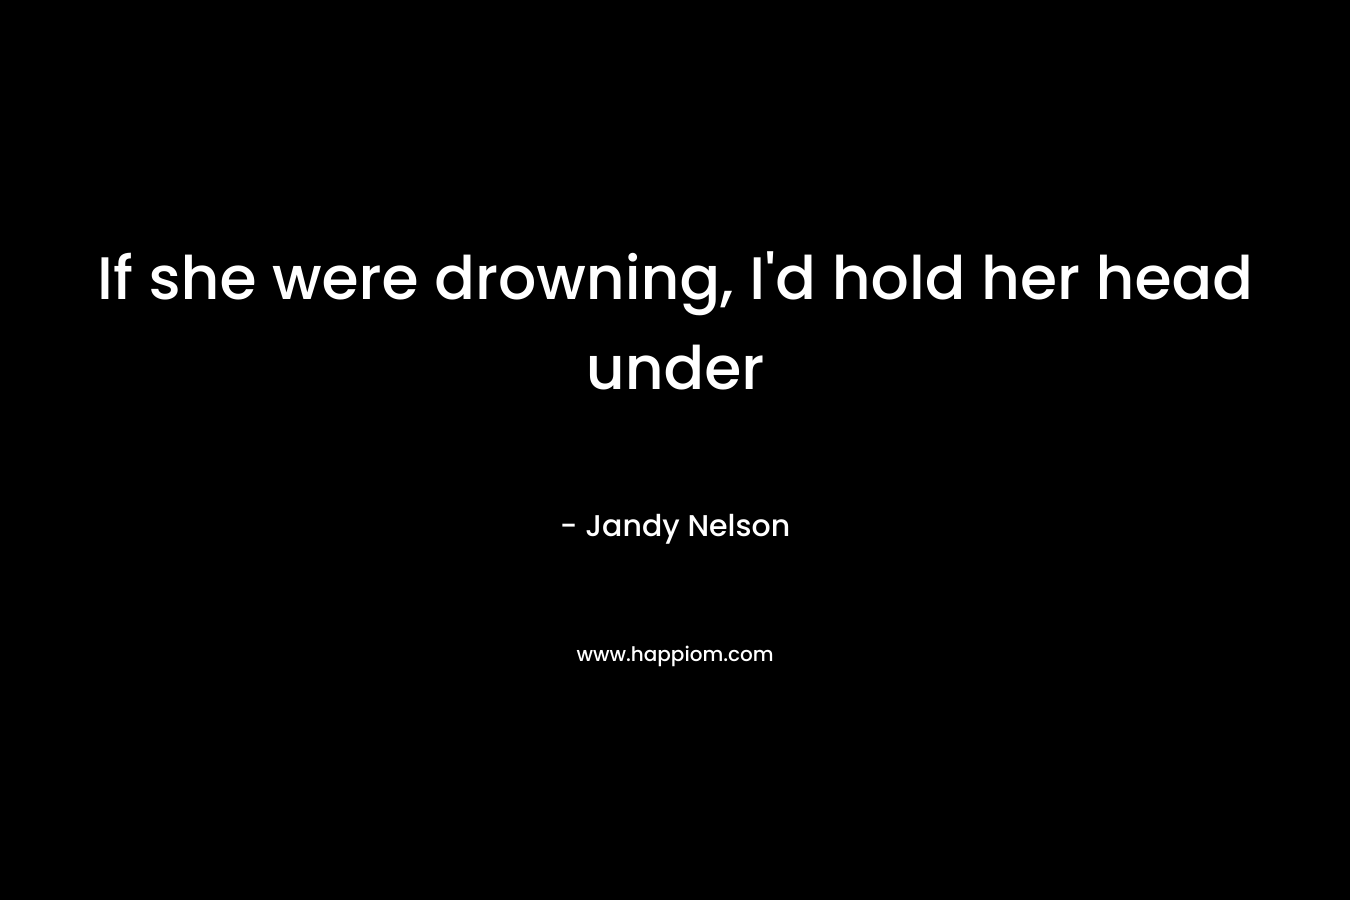 If she were drowning, I'd hold her head under